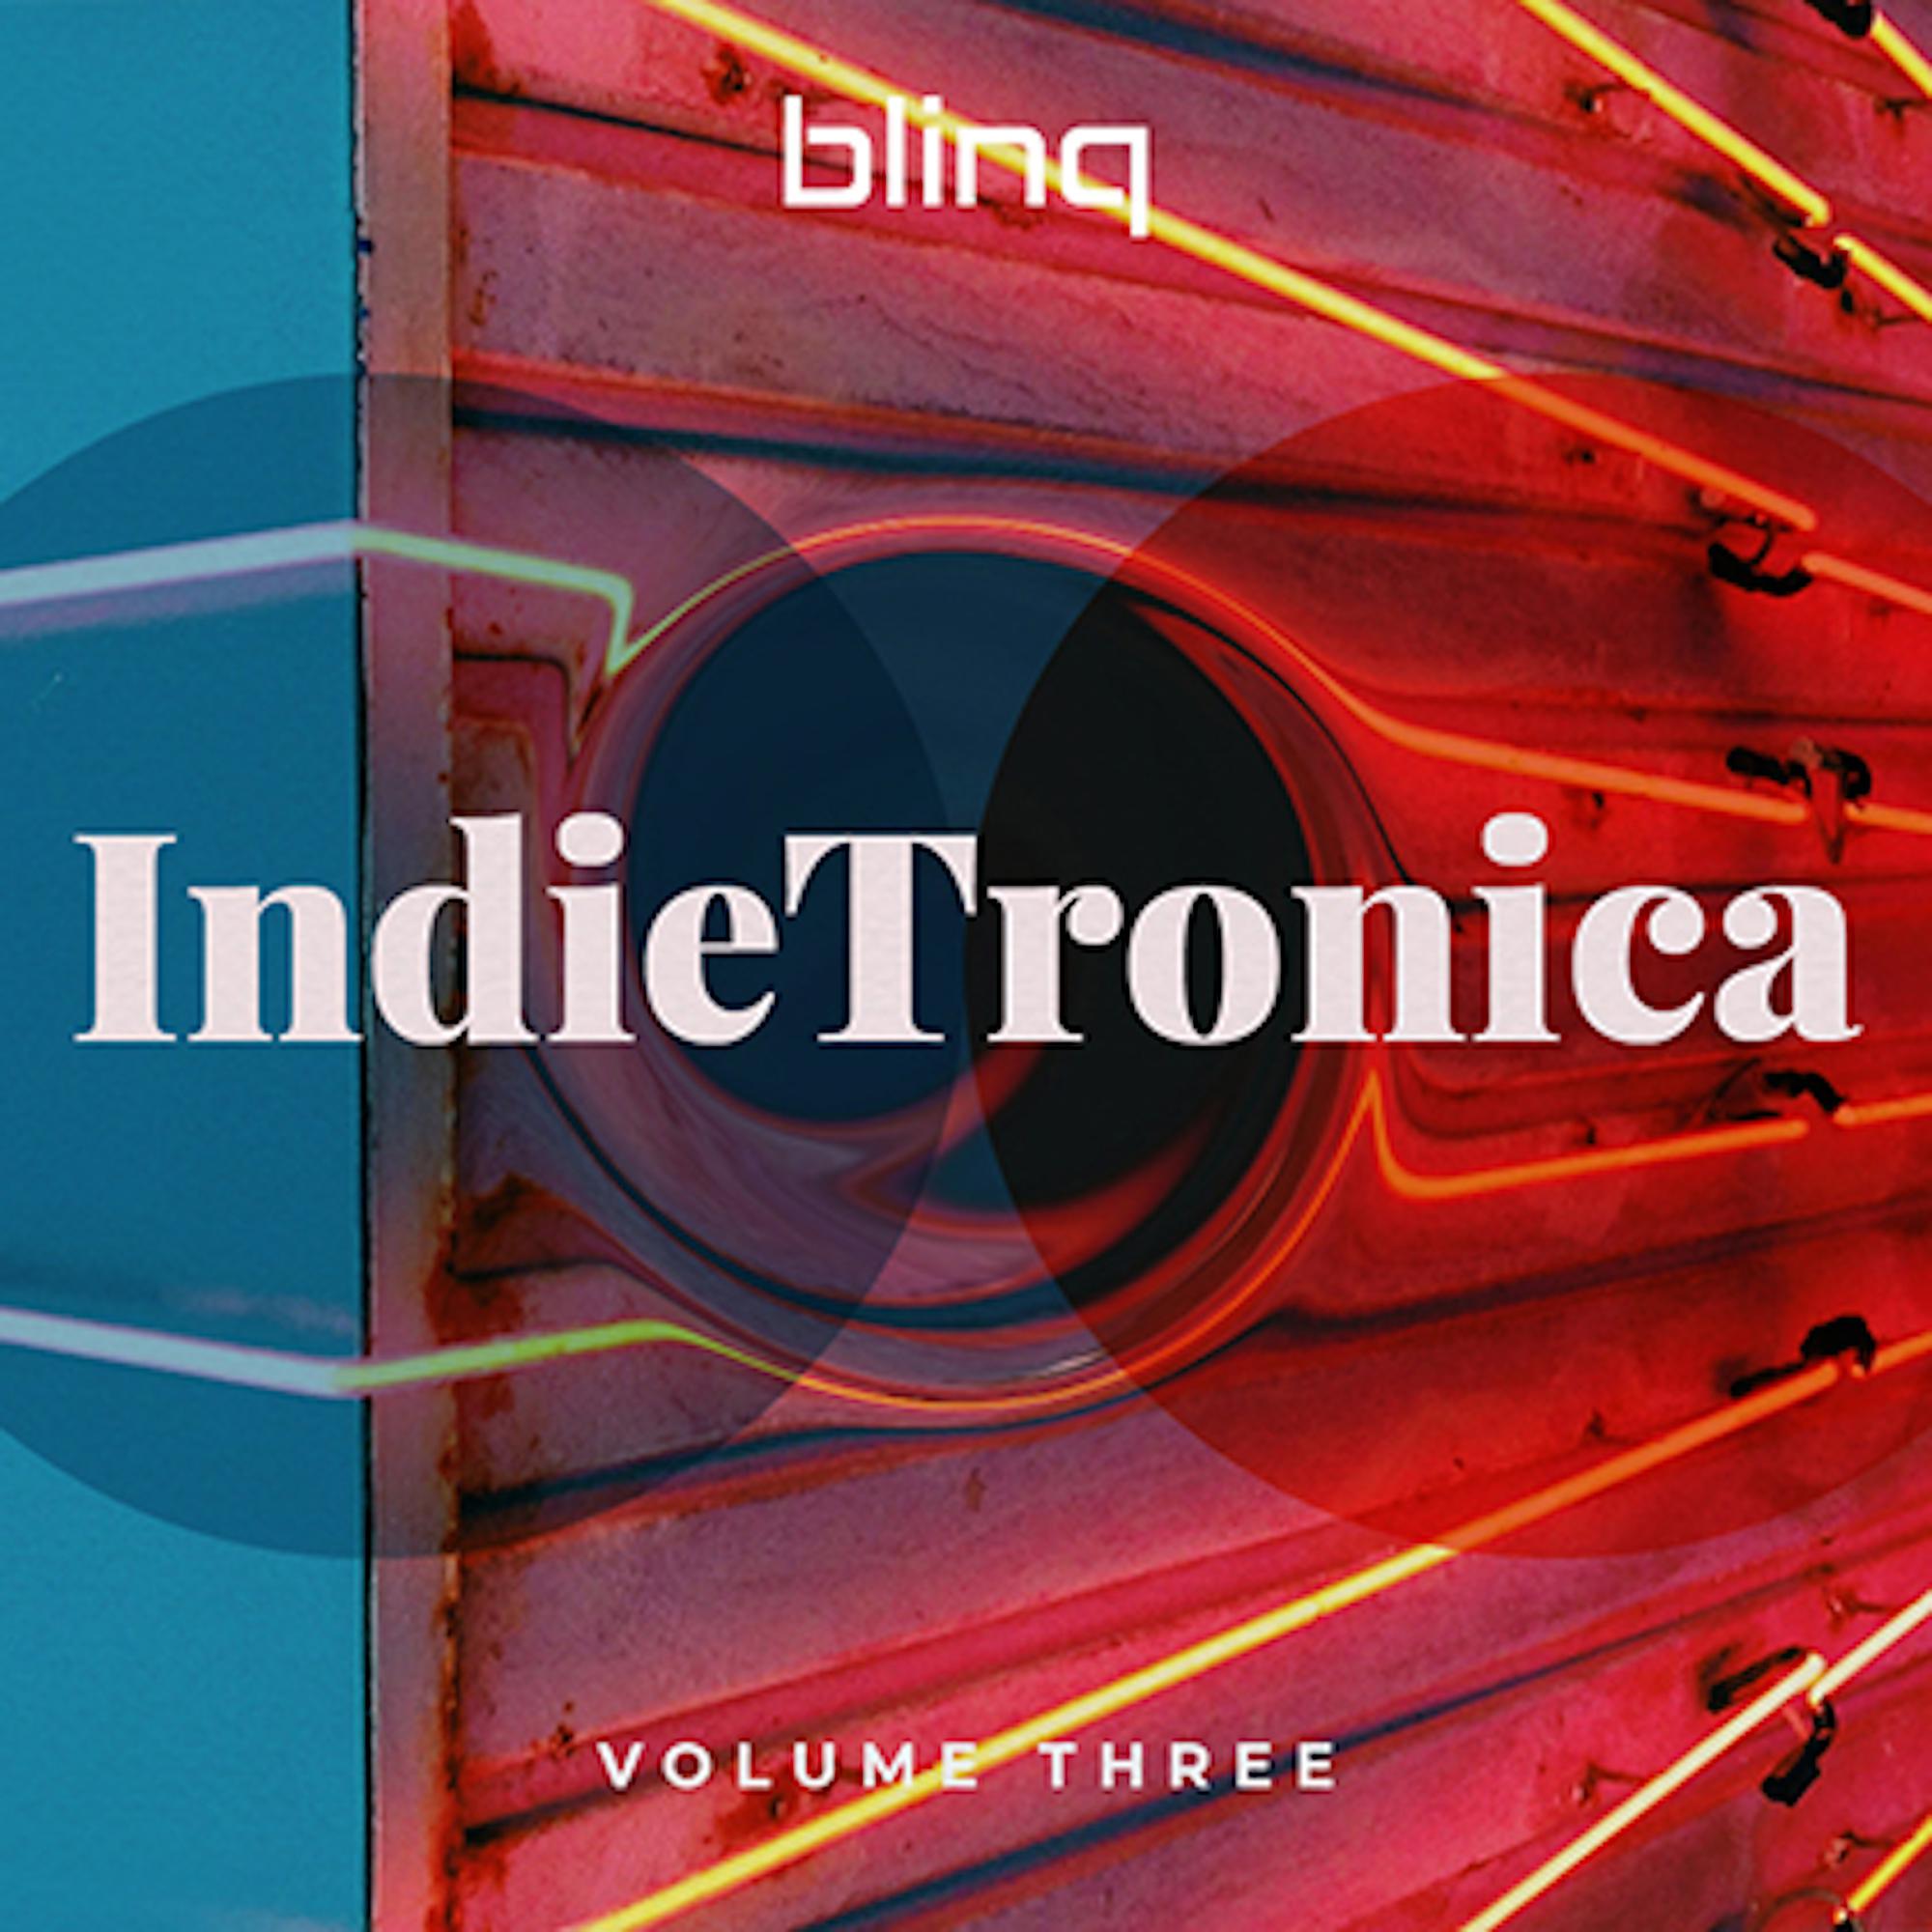 Indietronica, Vol. 3